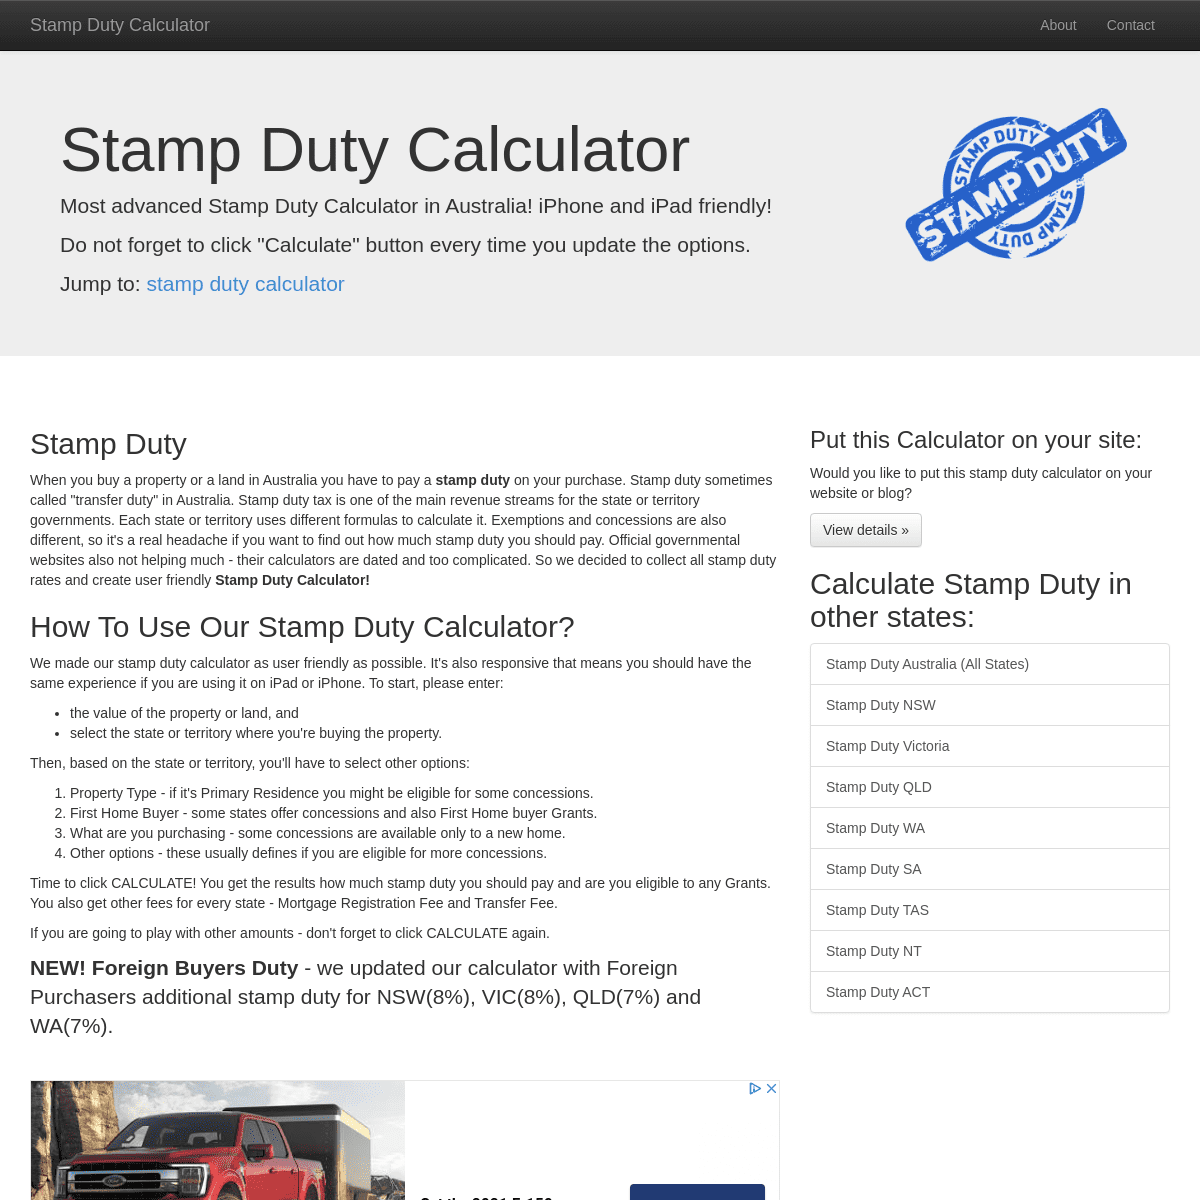 A complete backup of https://stampdutycalc.com.au